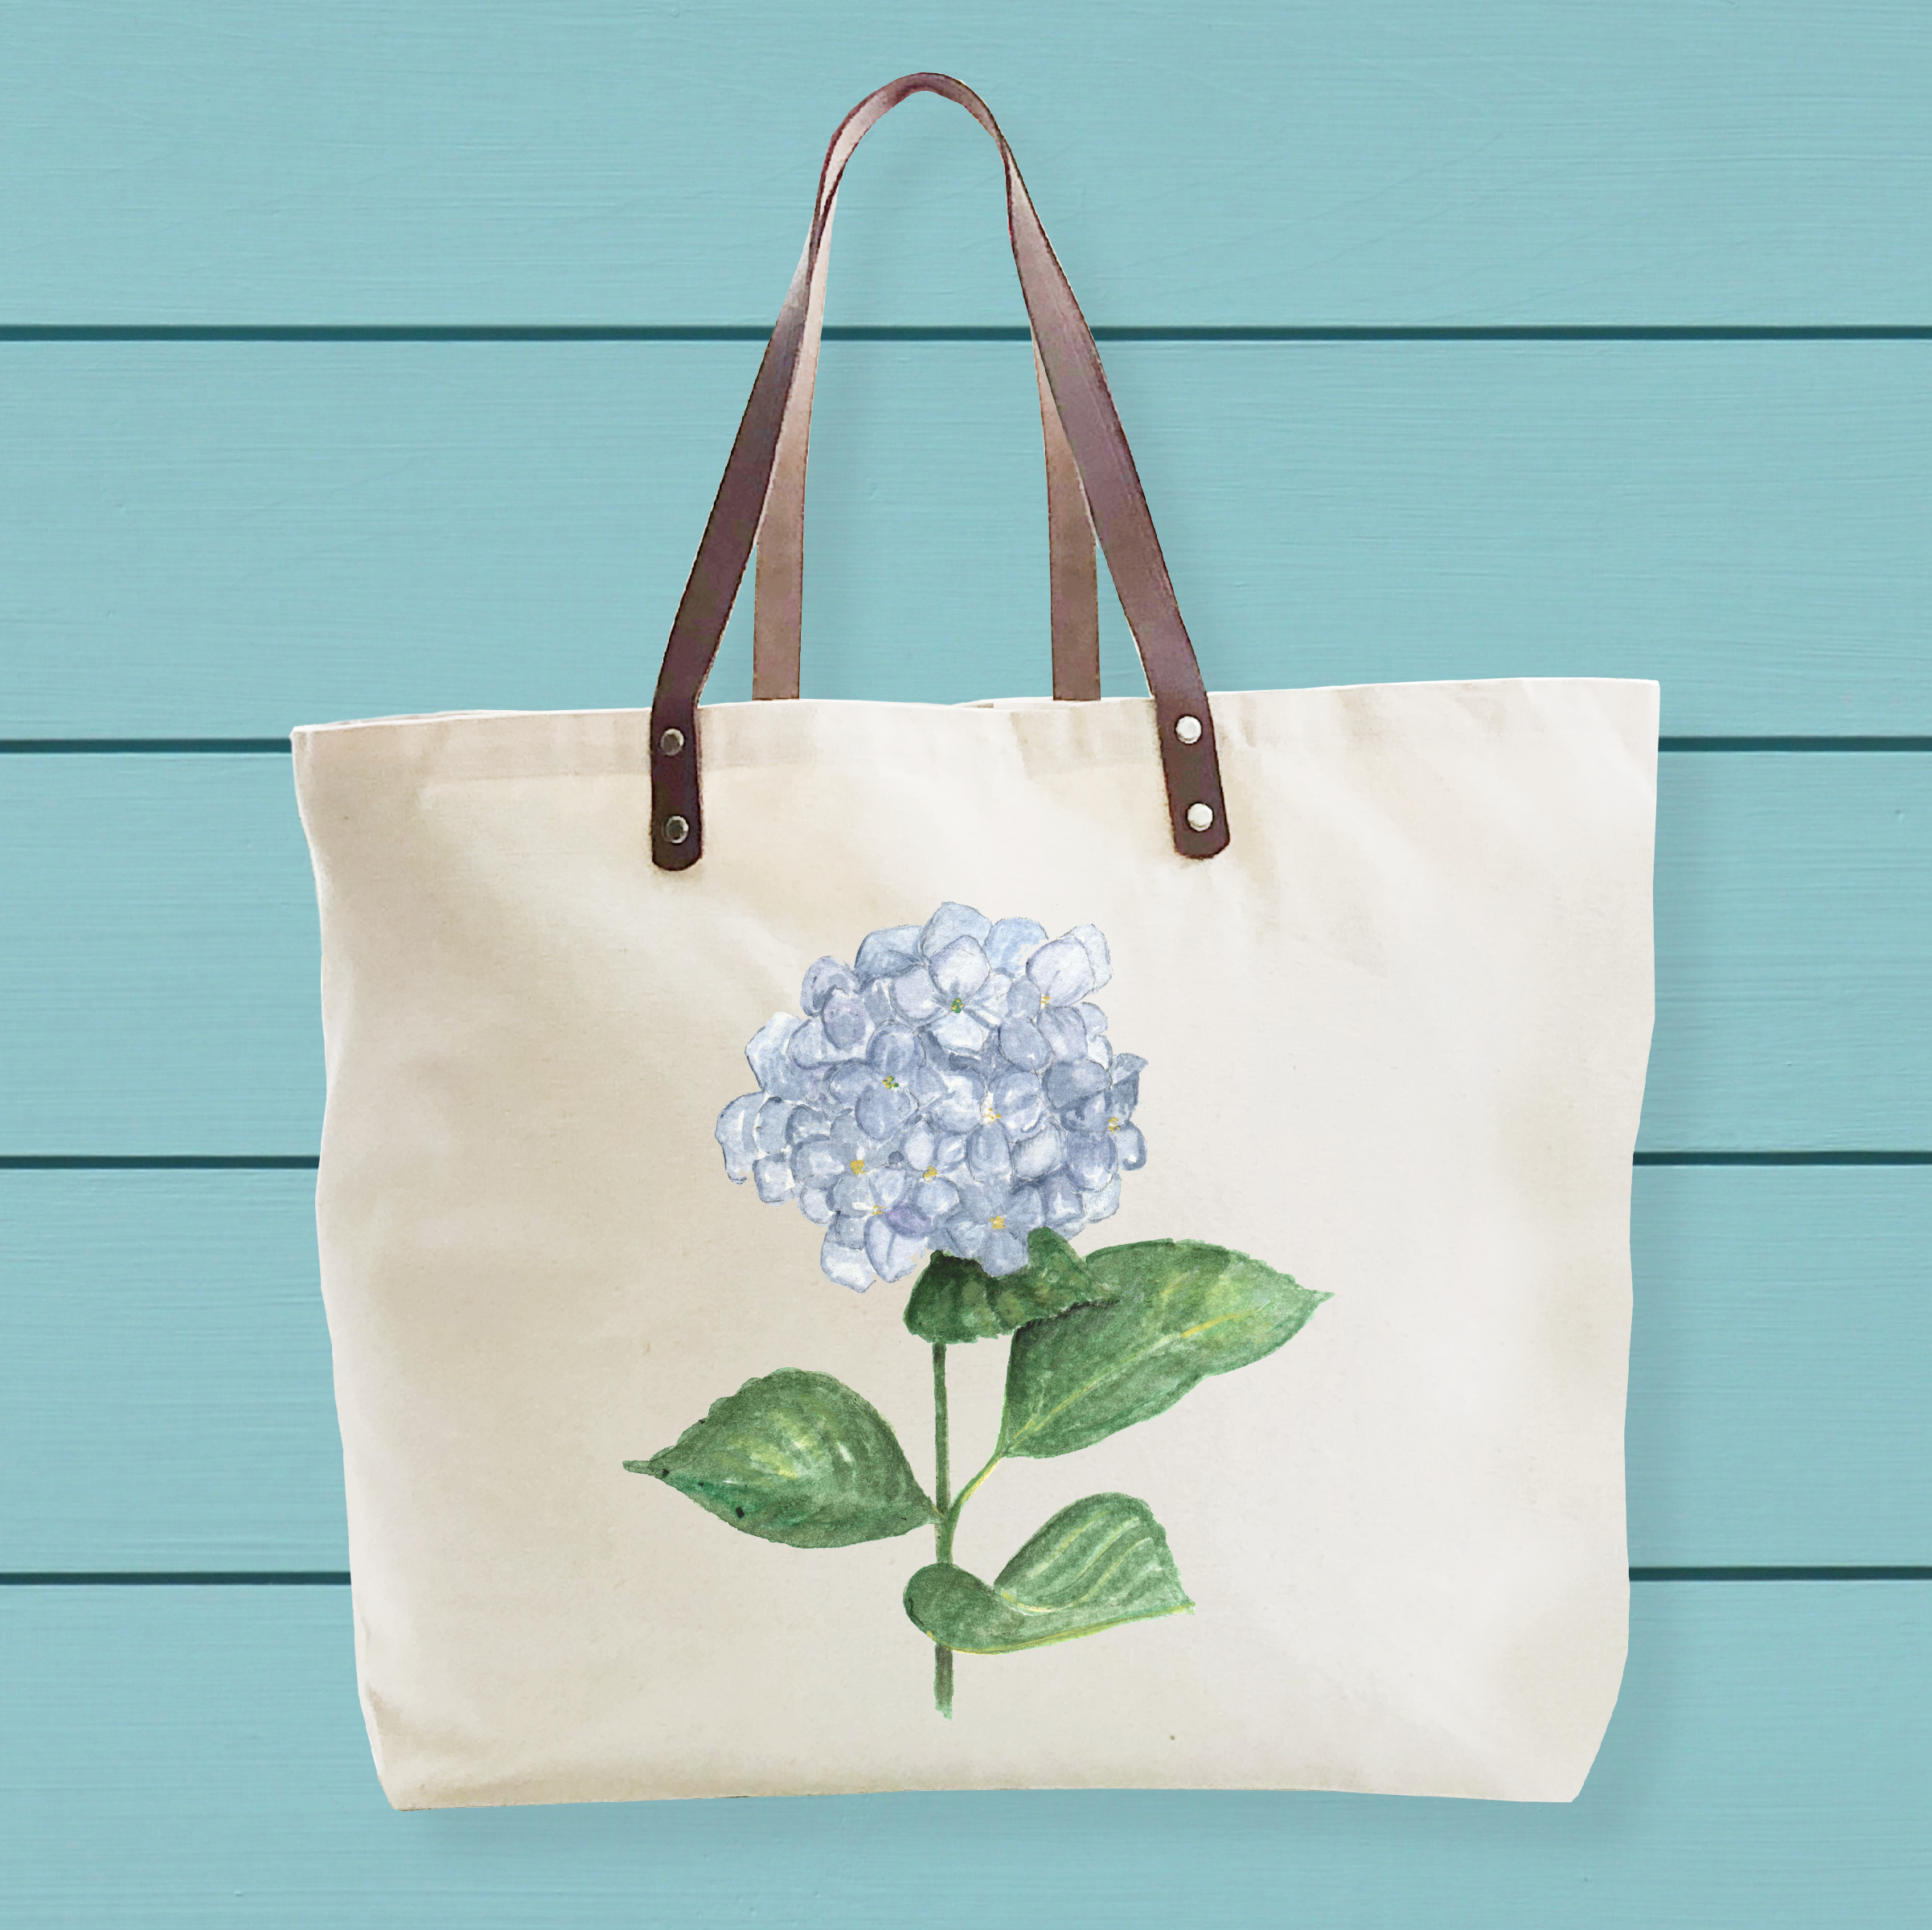 Tote with leather handle